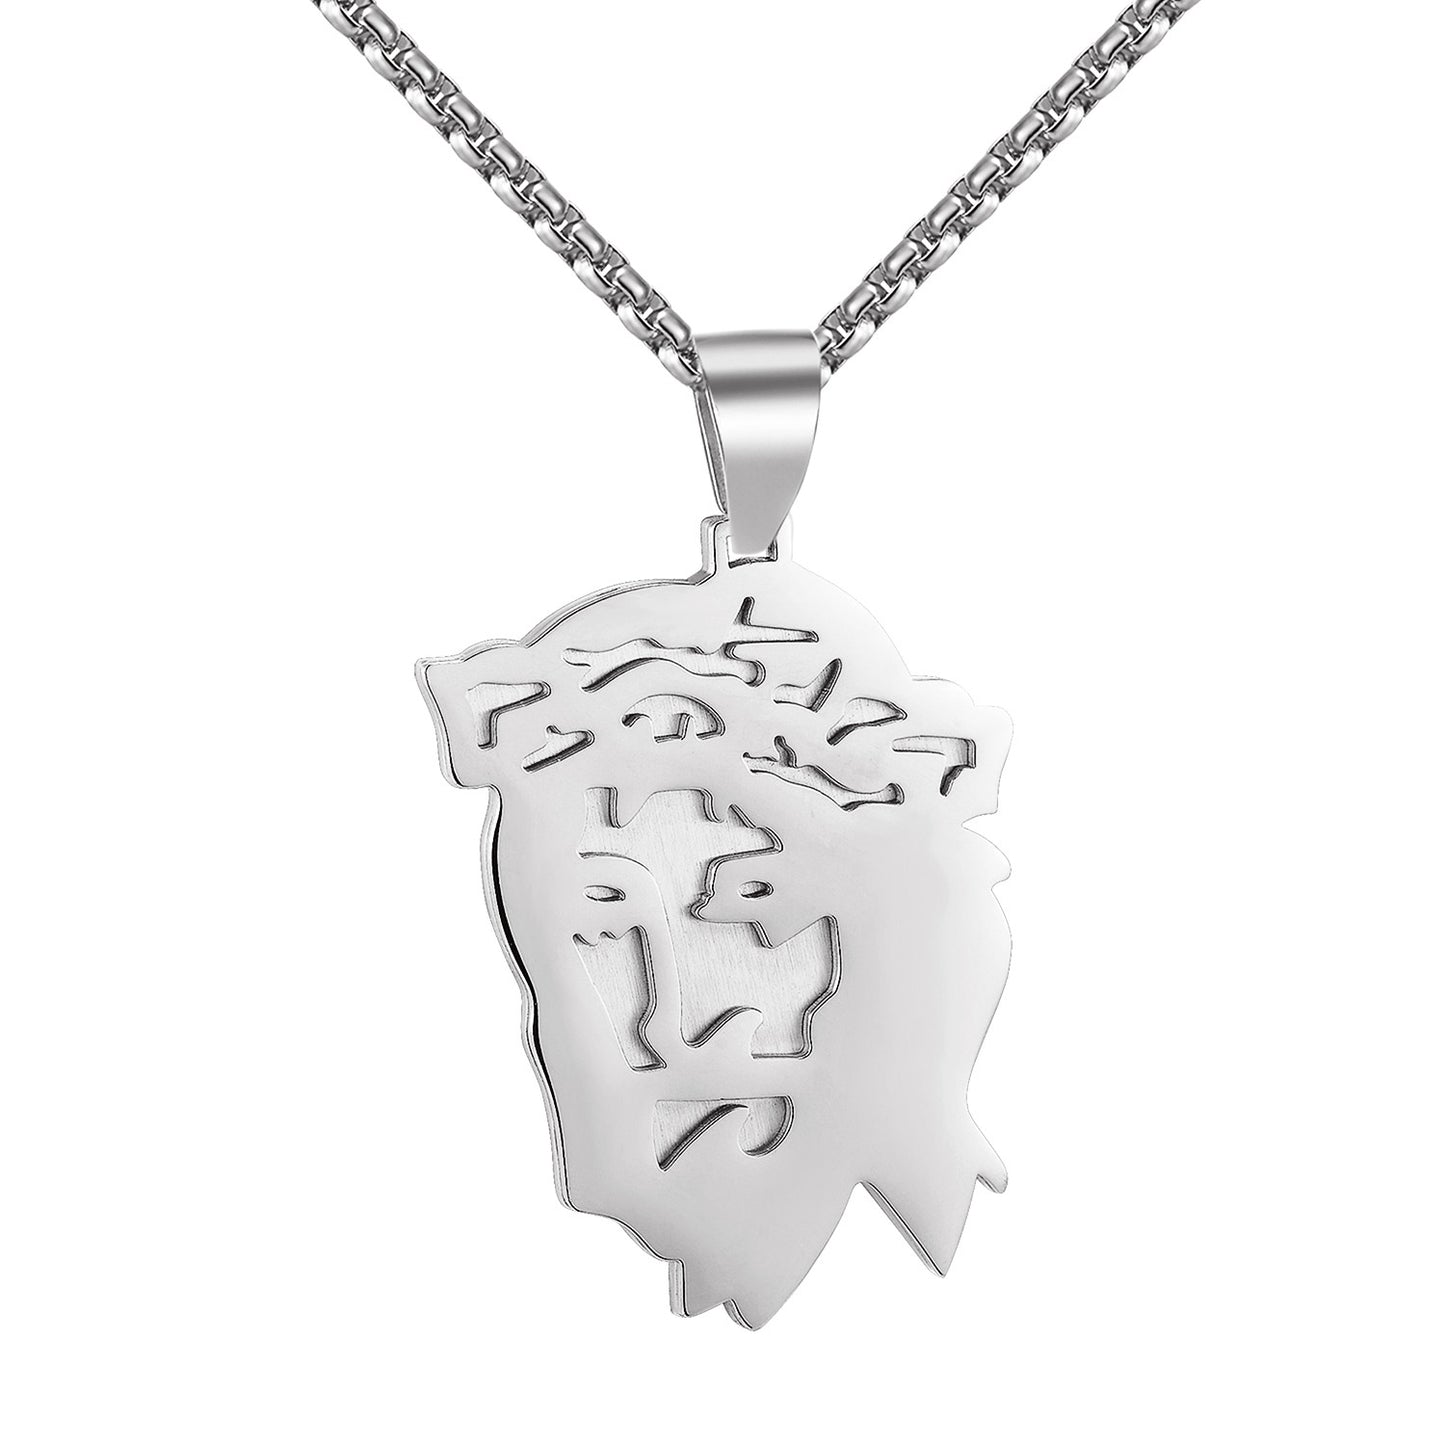 Jesus Face Pendant Necklace Set 2.3" Charm Stainless Steel Christ Silver Tone